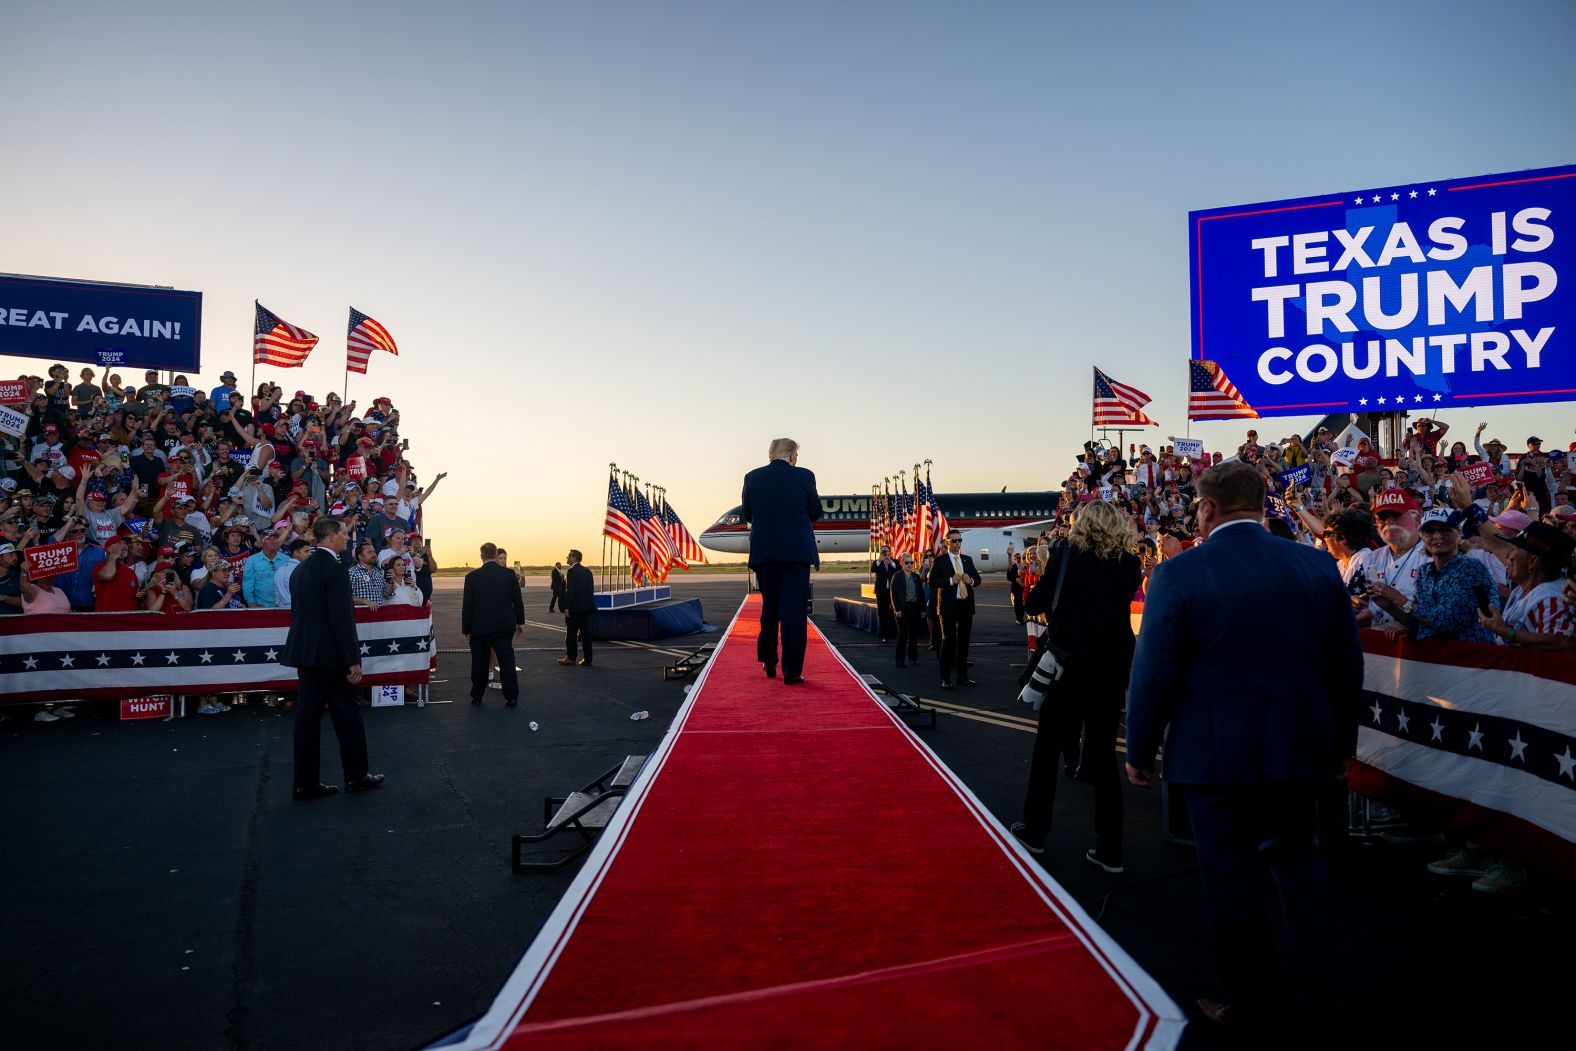 Trump leaves after speaking at his rally in Waco on March 25, 2023. Trump, who is running for president again, <a href="index.php?page=&url=https%3A%2F%2Fwww.cnn.com%2F2023%2F03%2F25%2Fpolitics%2Ftexas-trump-2024-rally%2Findex.html" target="_blank">railed against what he called "prosecutorial misconduct"</a> and denied any wrongdoing amid investigations in New York, Georgia and Washington, DC.